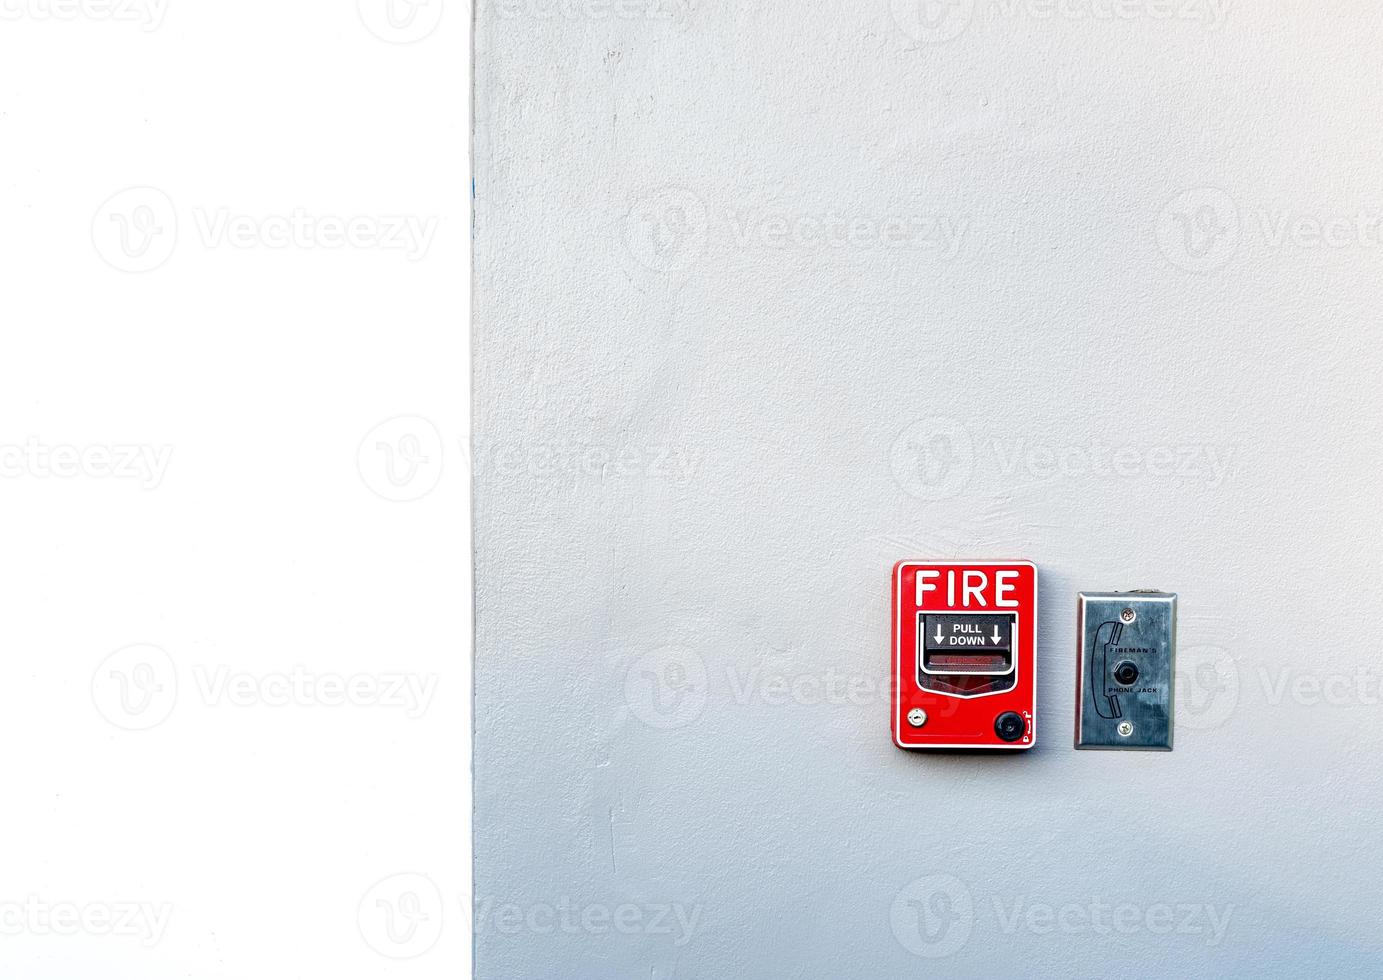 Fire alarm on white concrete wall. Warning and security system. Emergency equipment for safety alert. Red box of fire alarm on wall of school, hospital, factory, office, apartment, or home. Pull down. photo